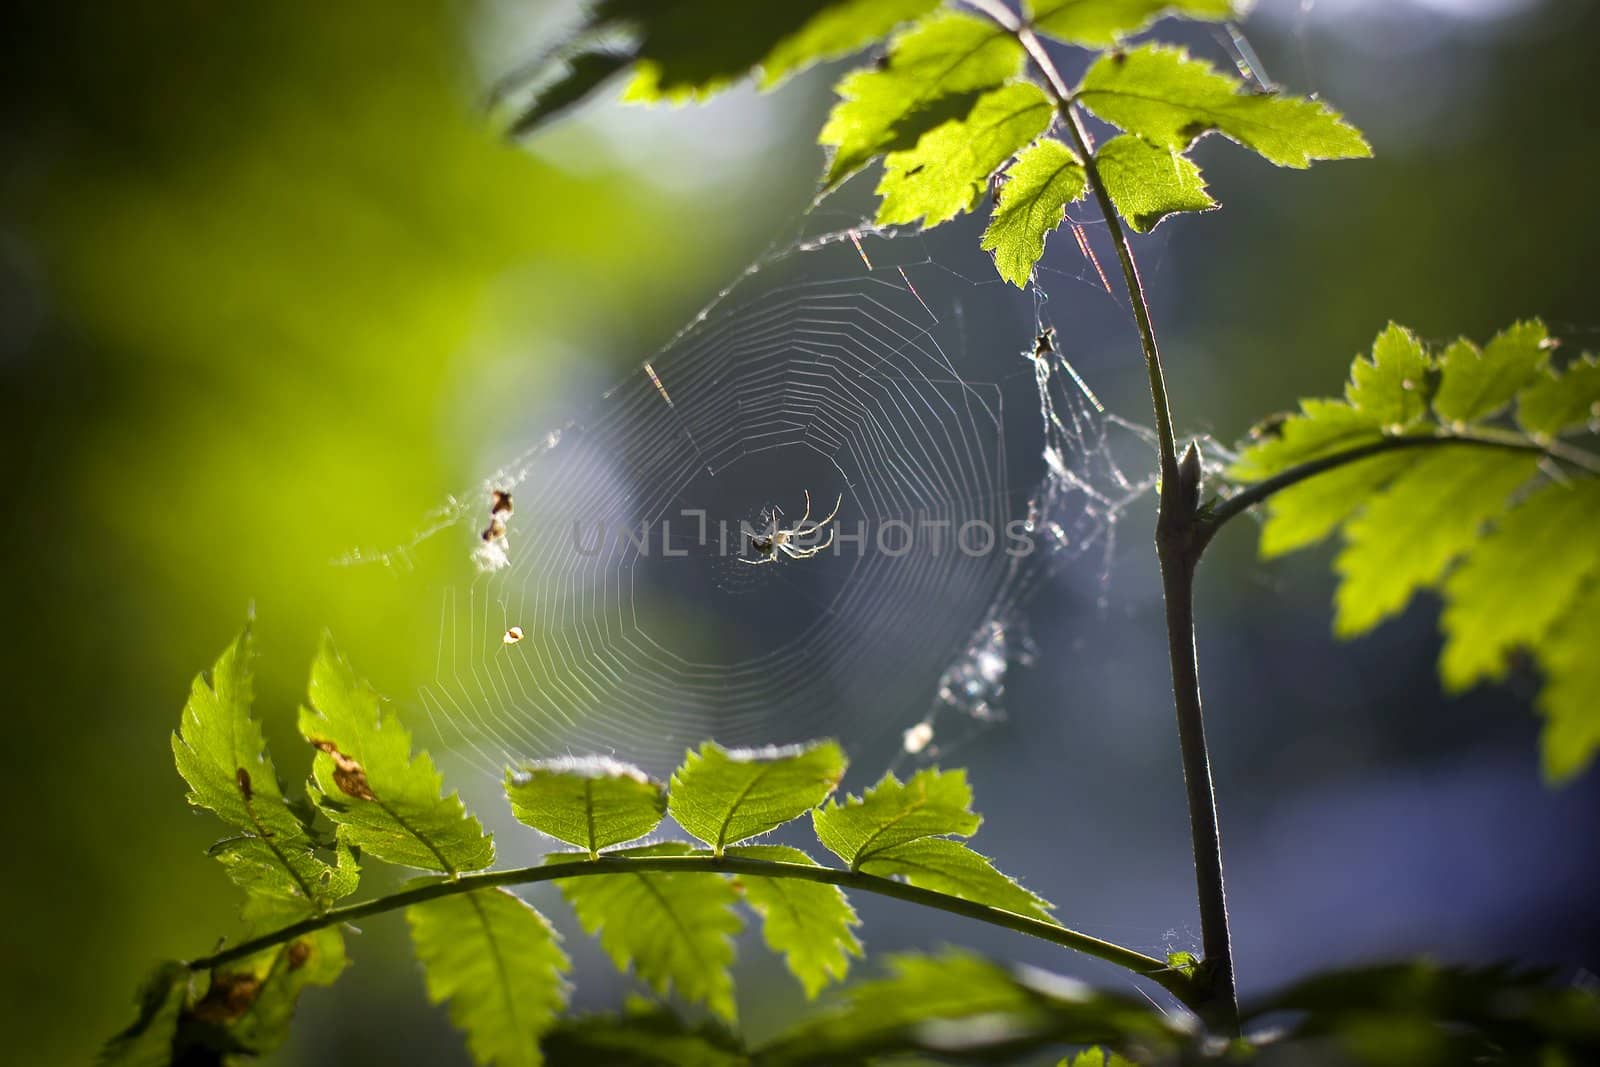 Small spider in the center of web. Summer.